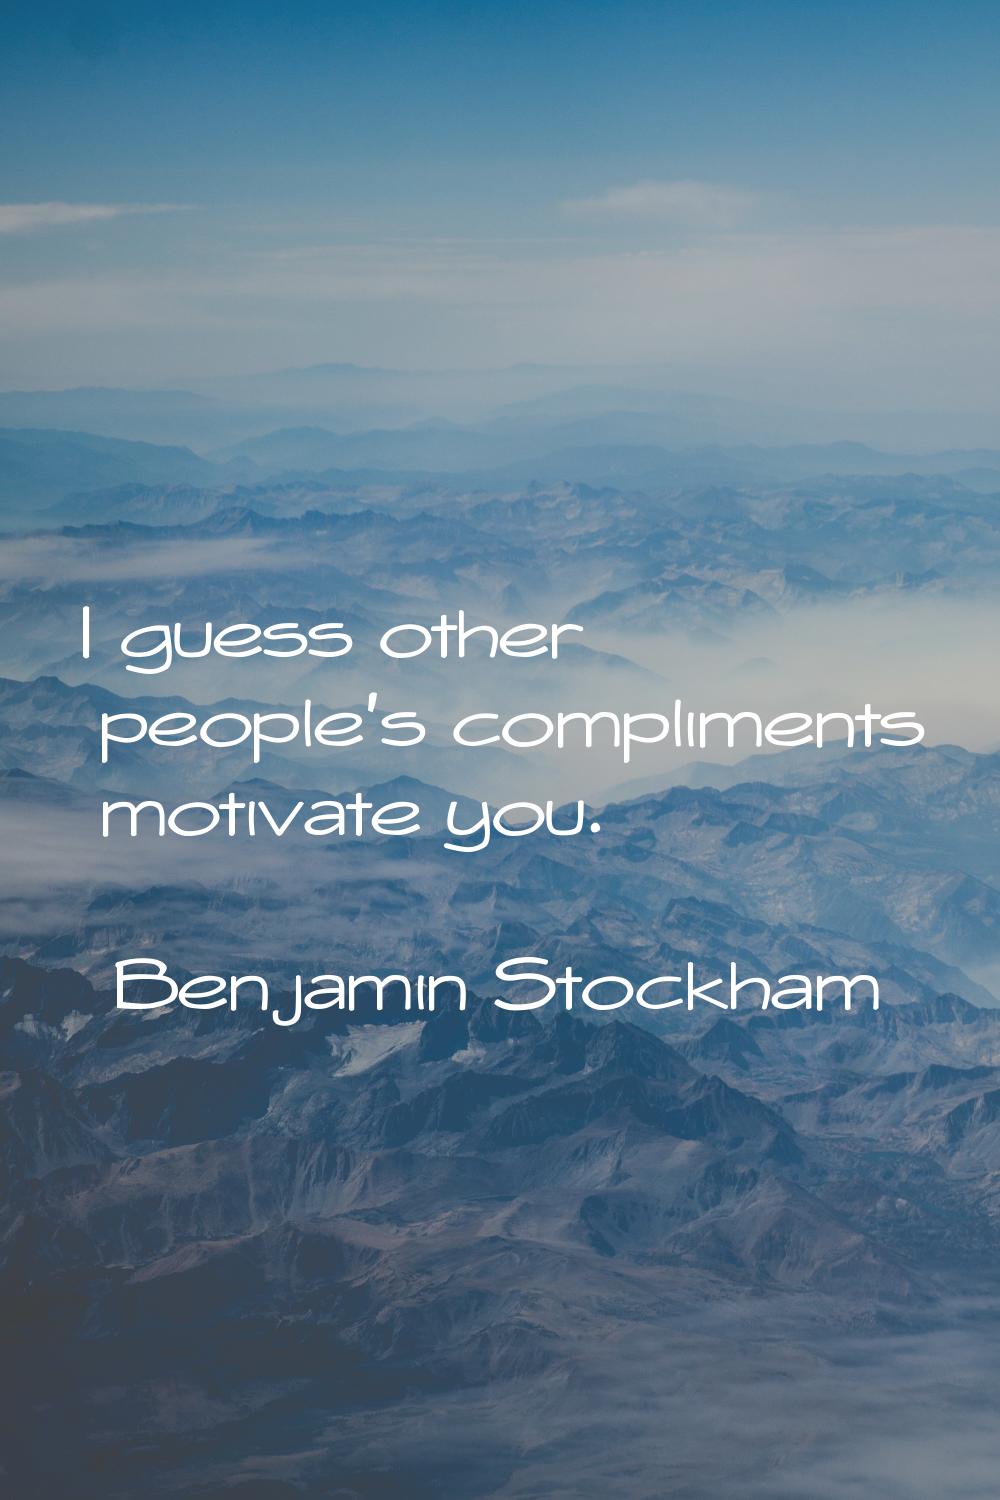 I guess other people's compliments motivate you.